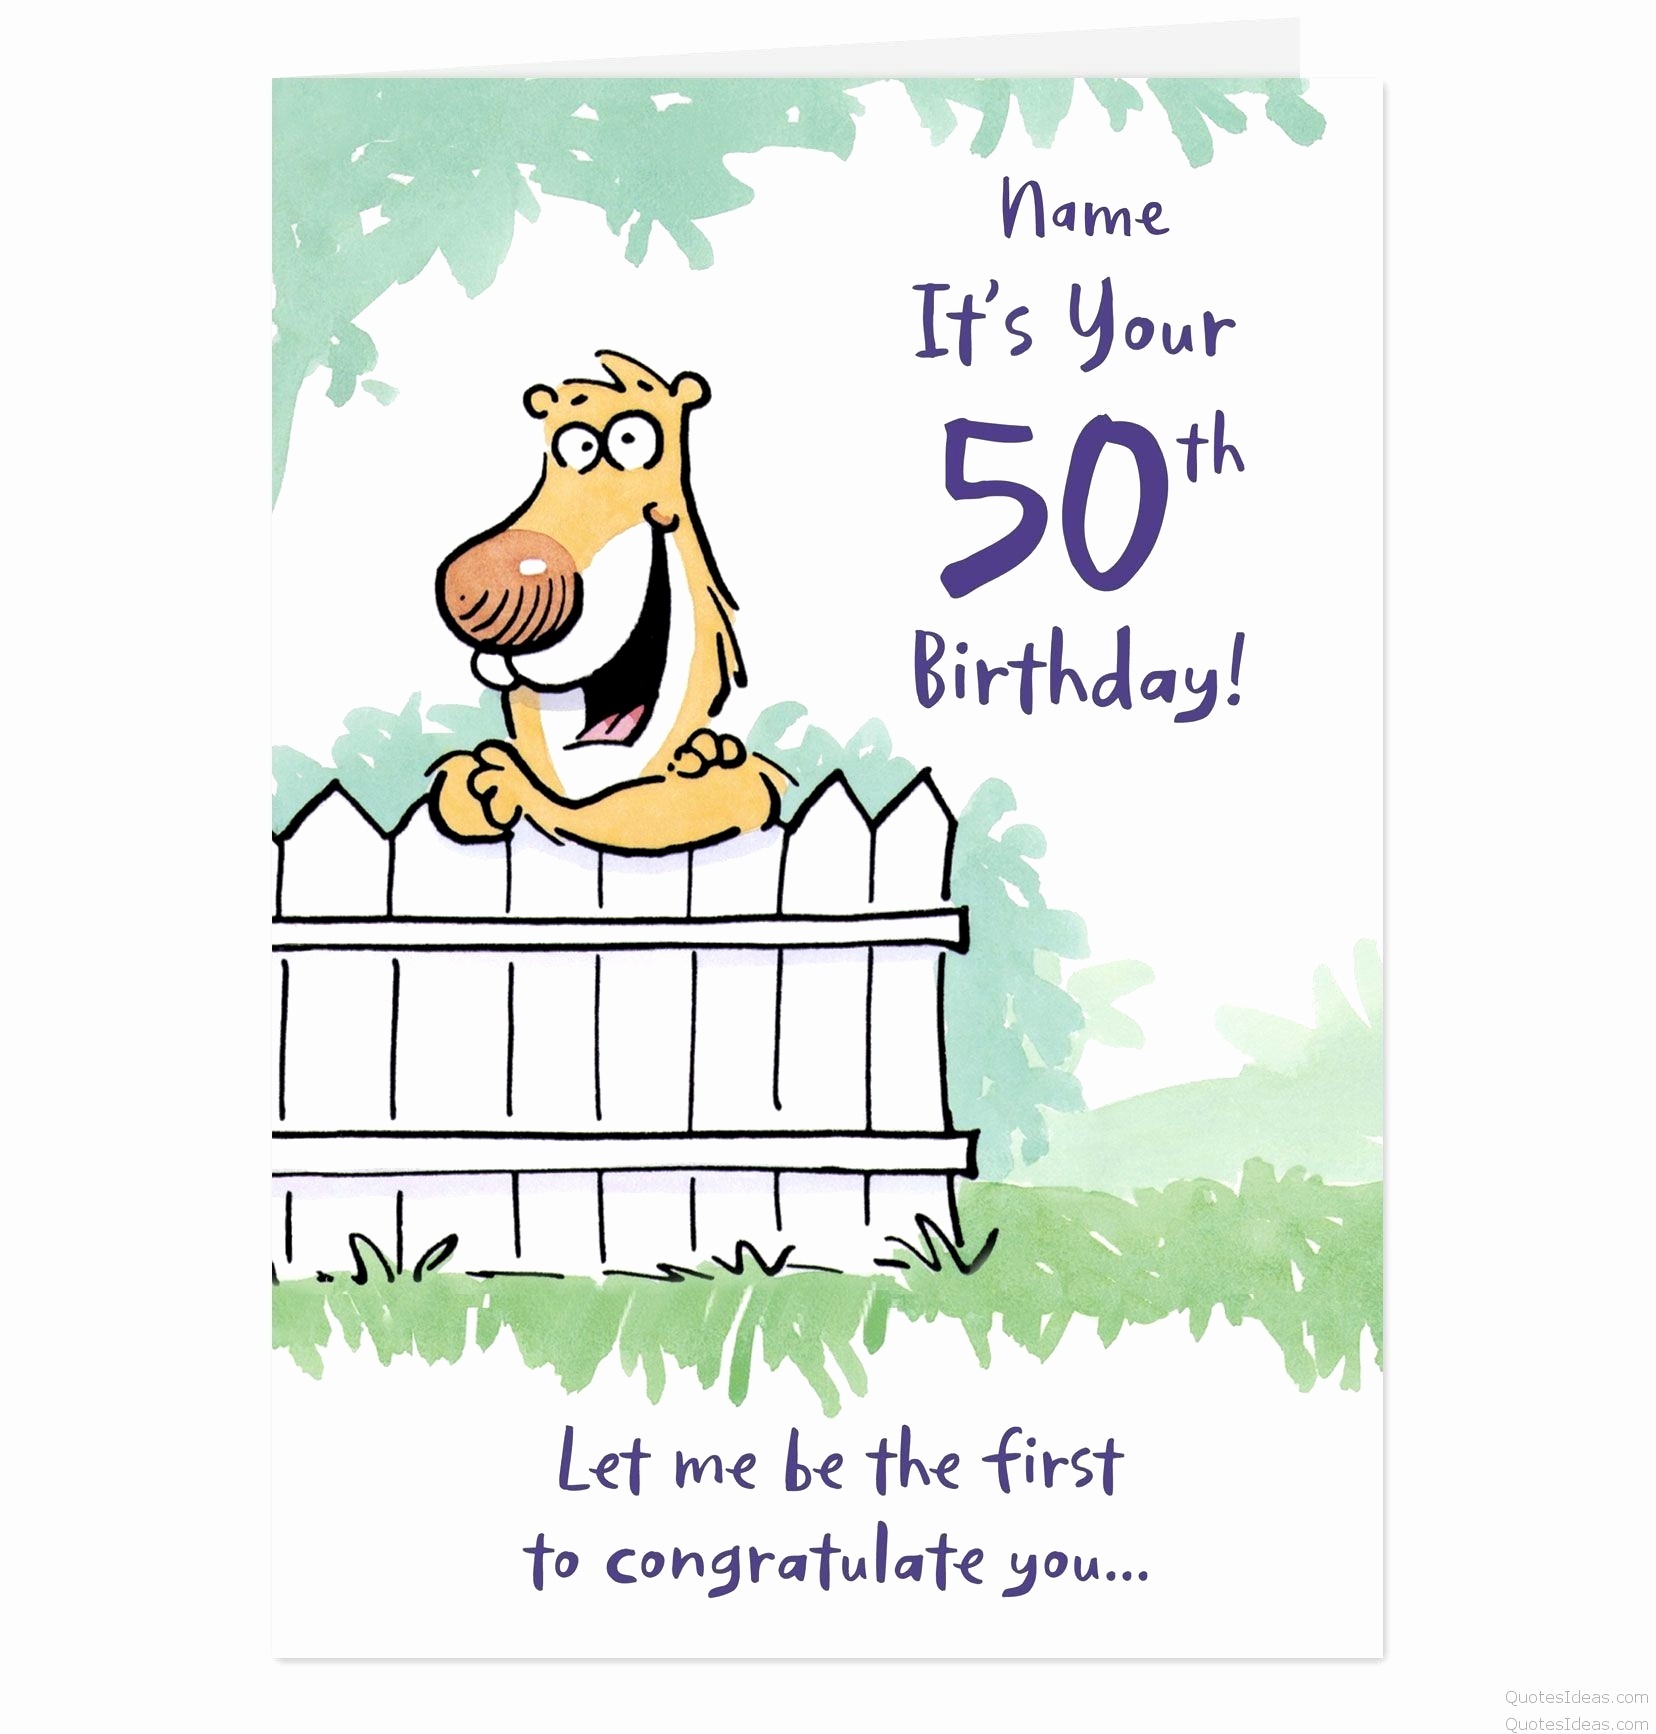 96+ Funny Birthday Cards 50 Years Old - Funny Birthday Cards For 50 - Free Printable 50Th Birthday Cards Funny